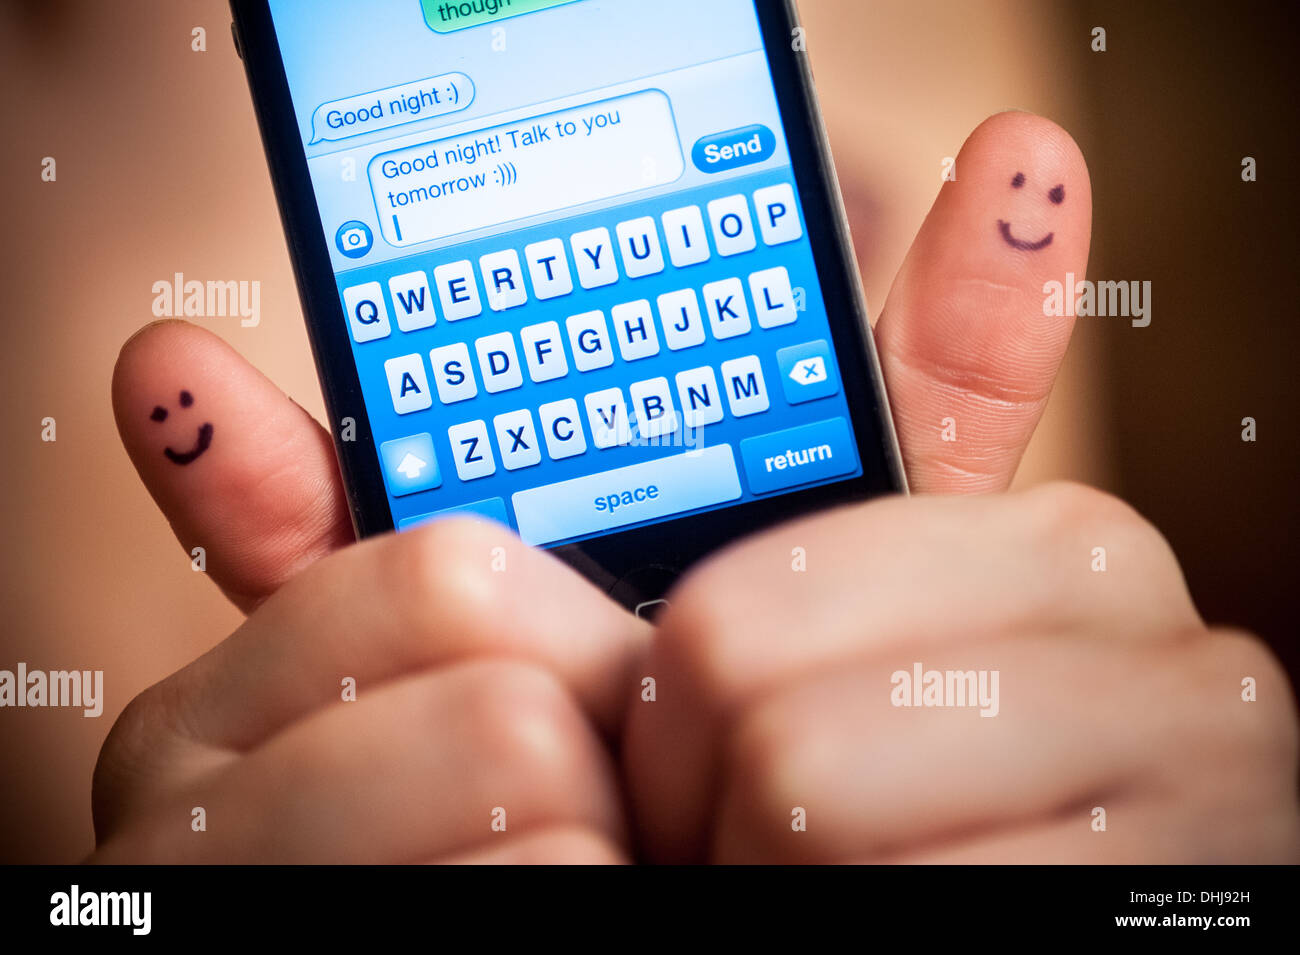 Pretty woman with smiles on thumbs texting good night with smartphone Stock Photo